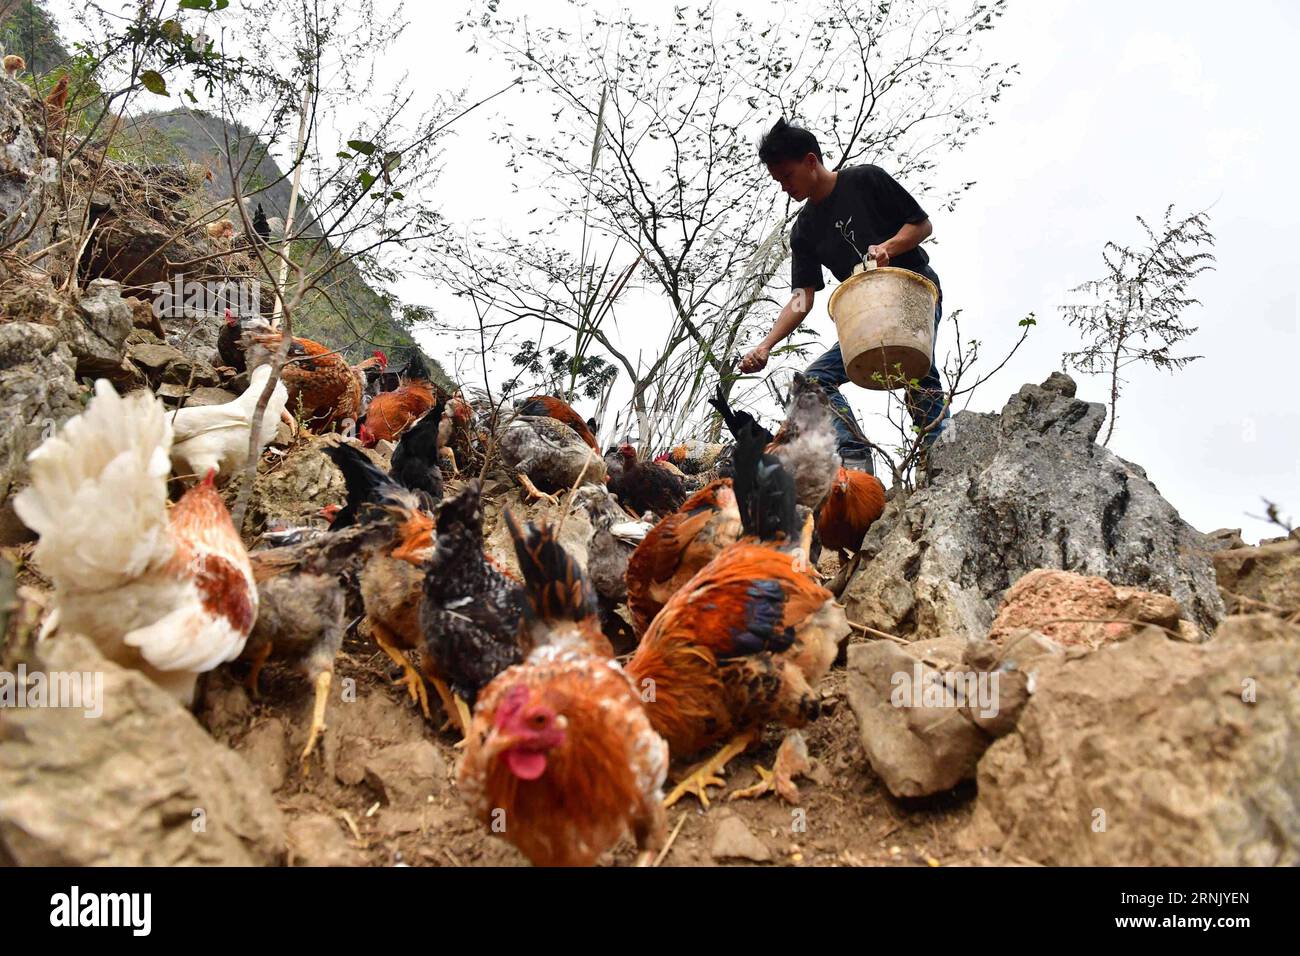 (170221) -- DAHUA, A villager feeds chickens in Nongxiong Village of Qibainong Township in Dahua Yao Autonomous County, south China s Guangxi Zhuang Autonomous Region, Jan. 5, 2017. Cursed by devils -- that is what the locals say about Qibainong. Named after the rugged karst landforms that surround it, the township has been identified as one of the most inhospitable places on earth by UN officials. However, change is expected soon. Local governments are building roads for every village with more than 20 households. Relocation has been proposed for those who live in extremely remote areas. )(mc Stock Photo